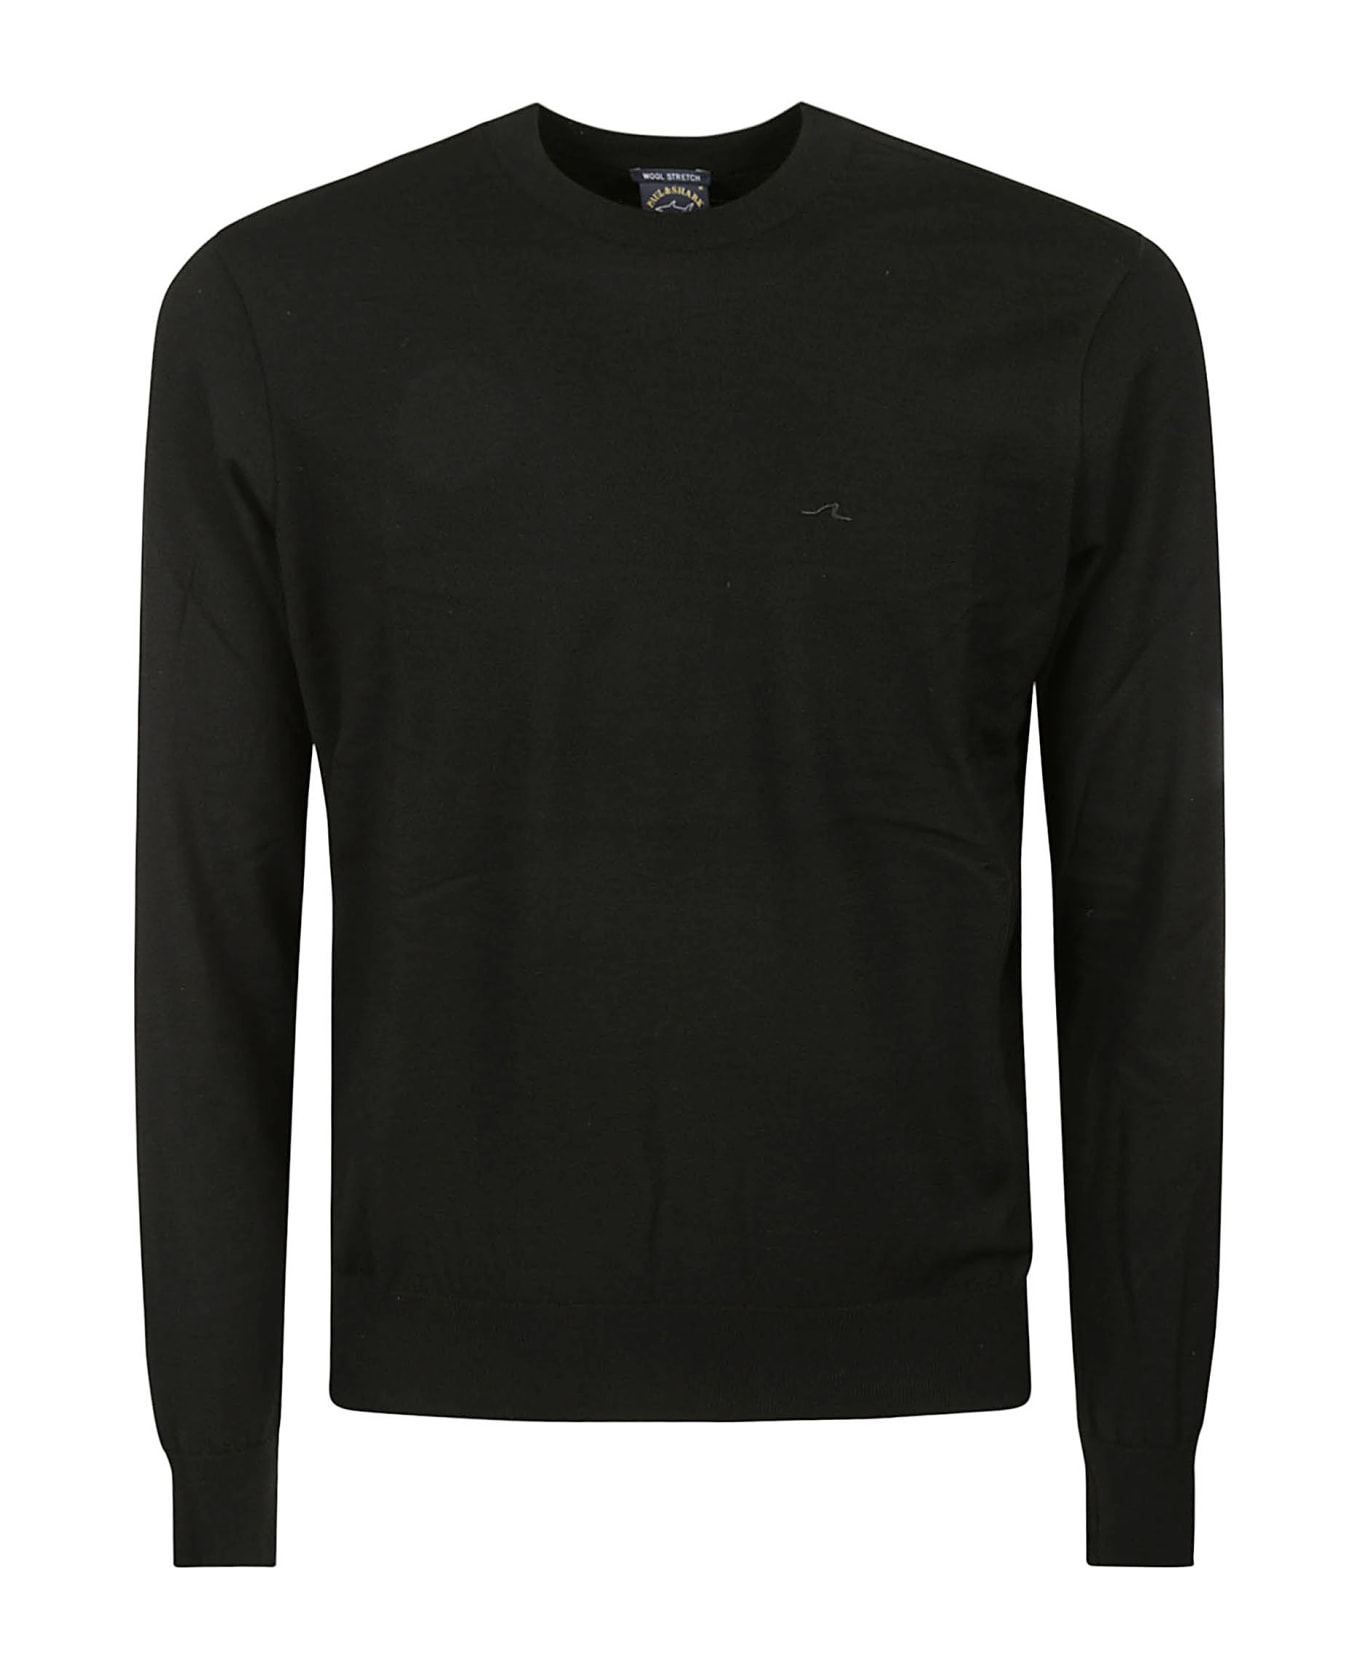 Paul&Shark Wool Stretch Crewneck With Embroidery - Black ニットウェア